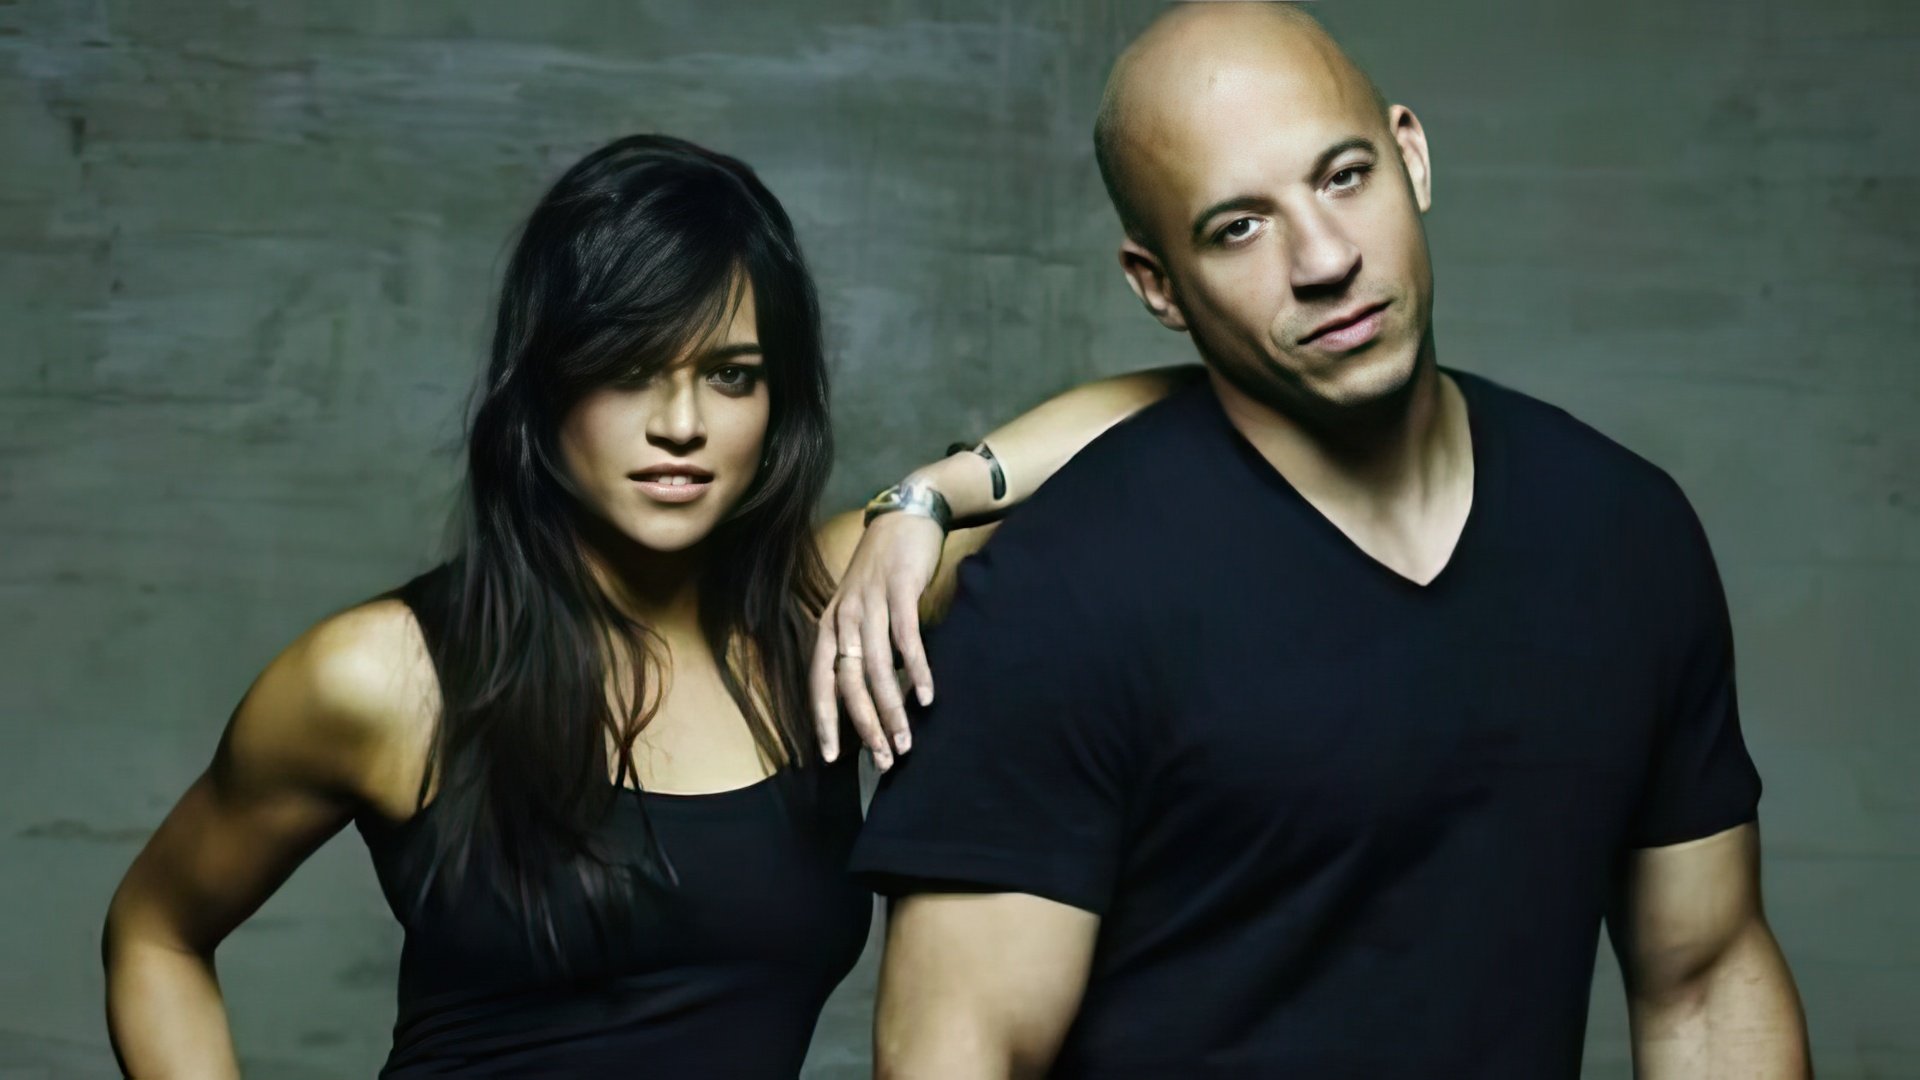 The love affair between Vin Diesel and Michelle Rodriguez began on the setting stage